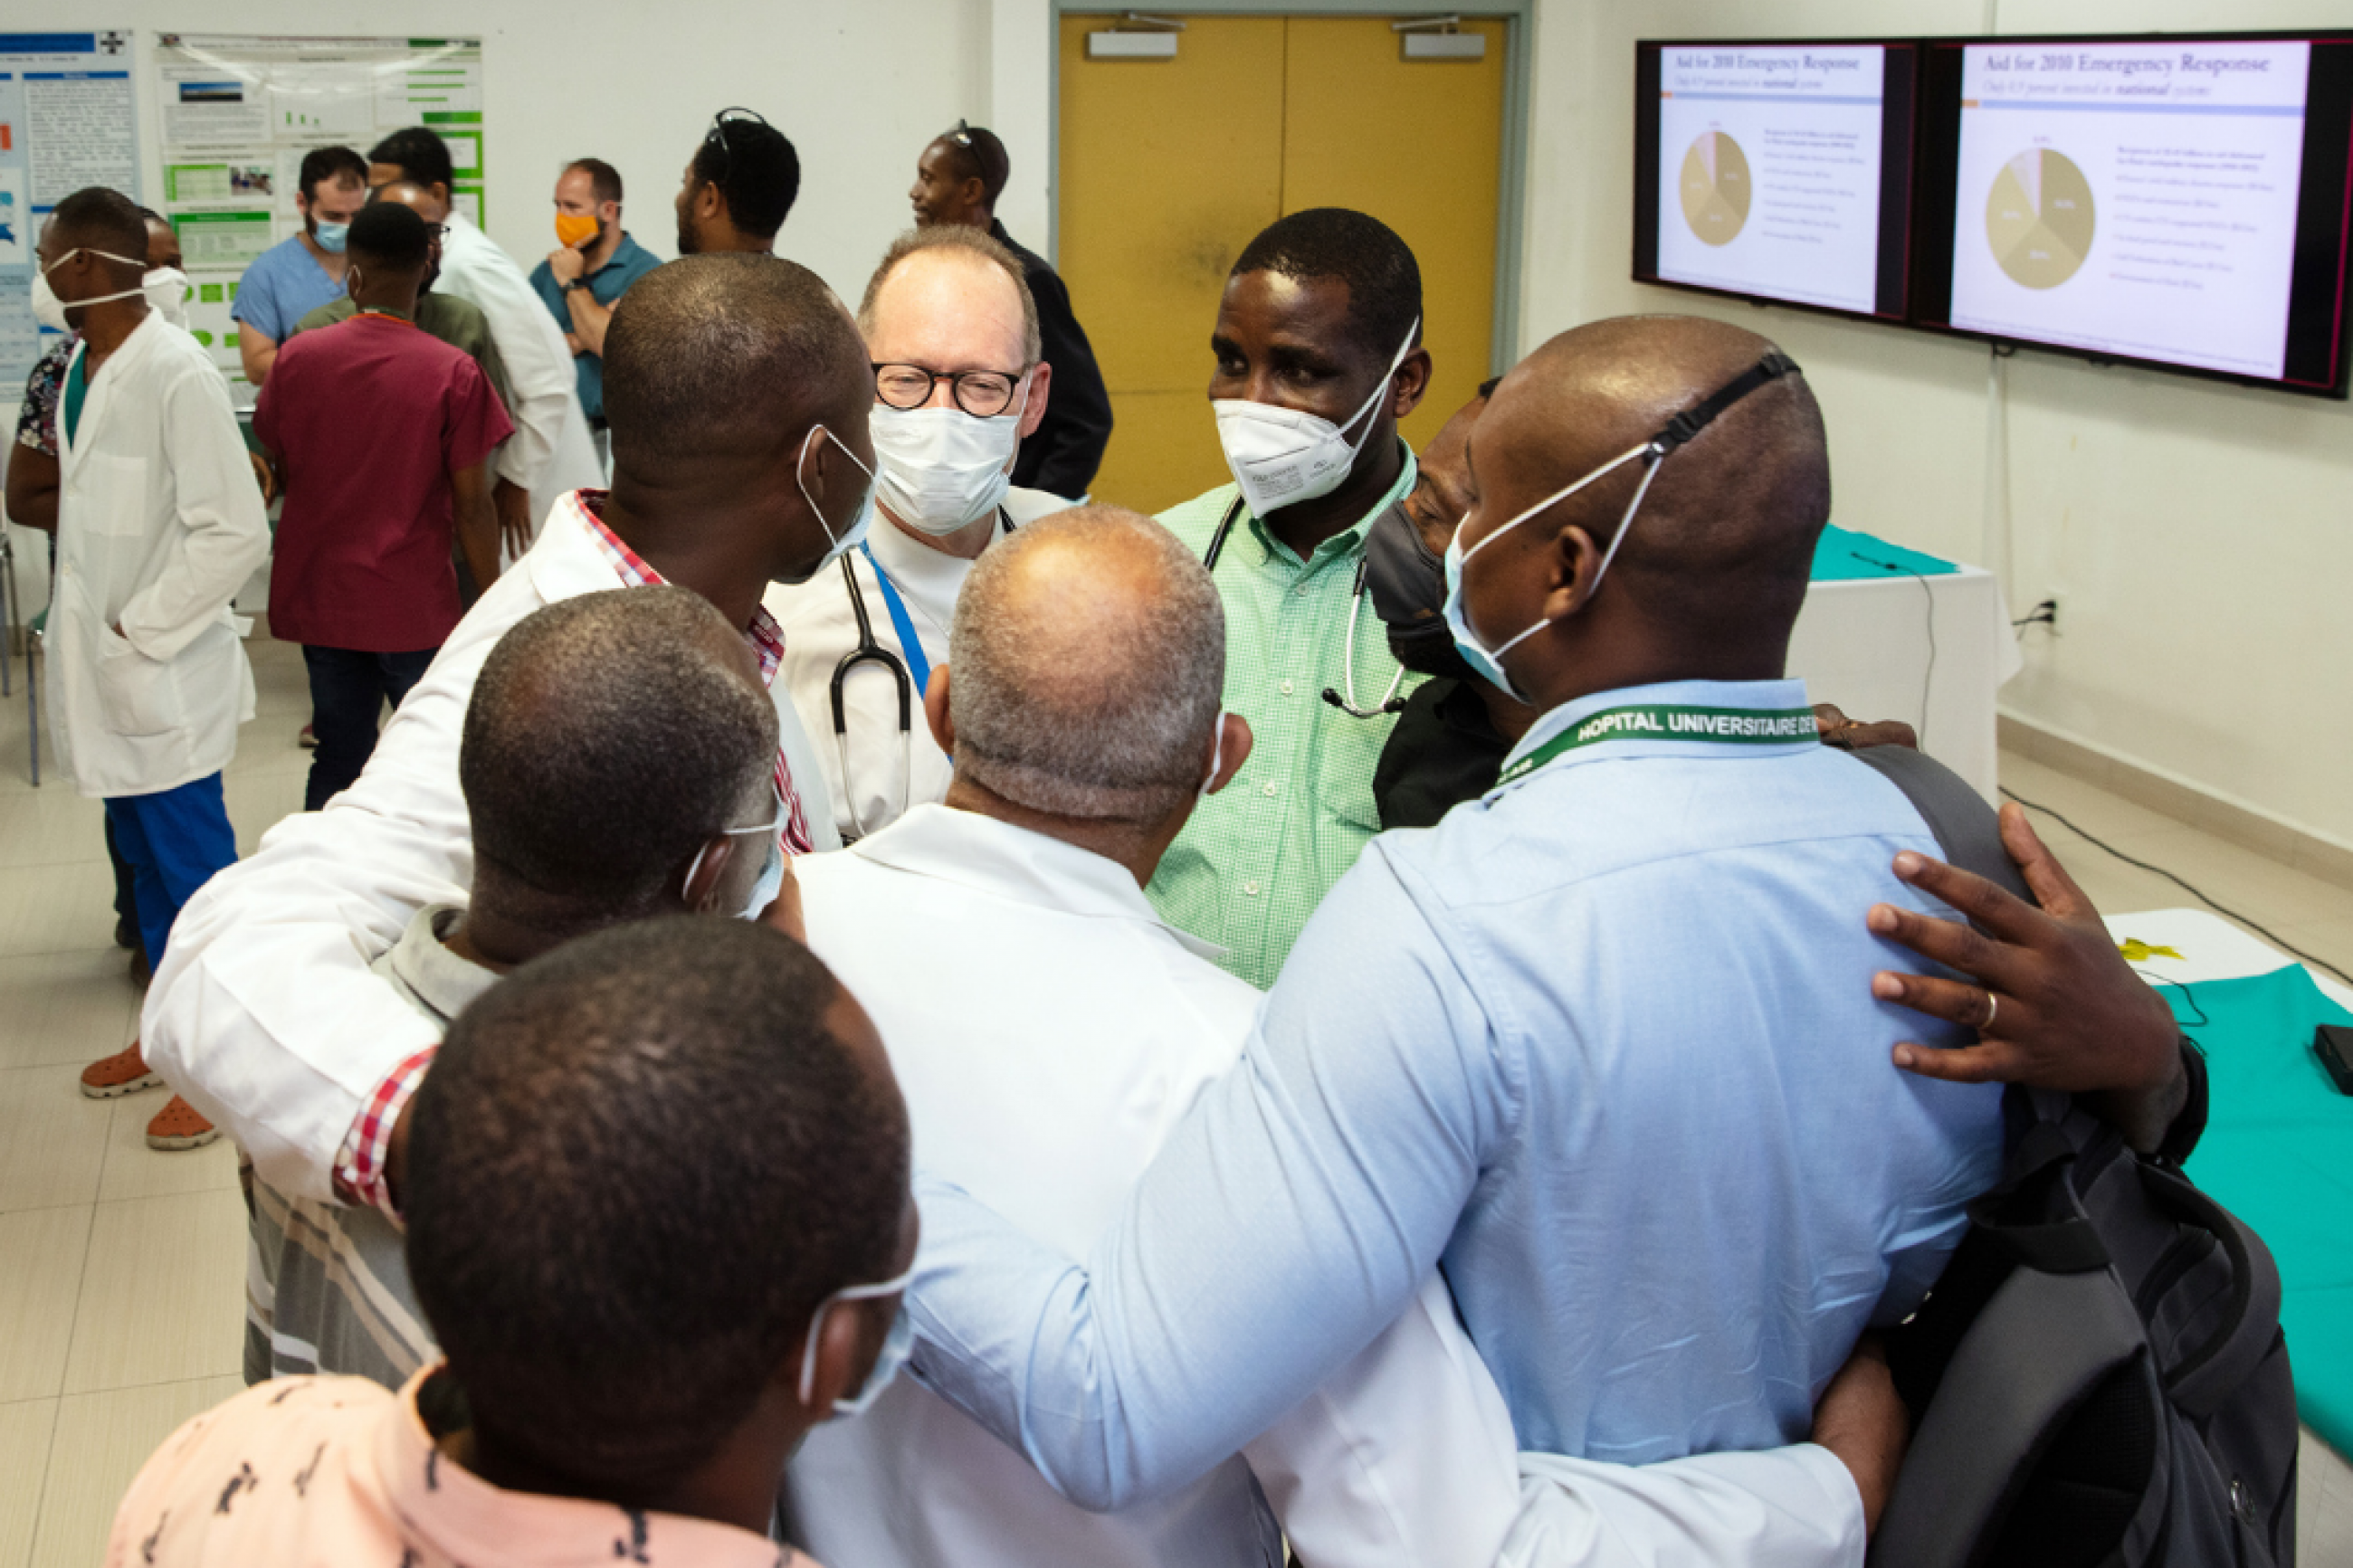 While helping with the response to the Aug. 14, 2021, earthquake, Dr. Paul Farmer gives a lecture on the 2010 Haiti earthquake and speaks with clinicians at Hospital University de Mirebalais.